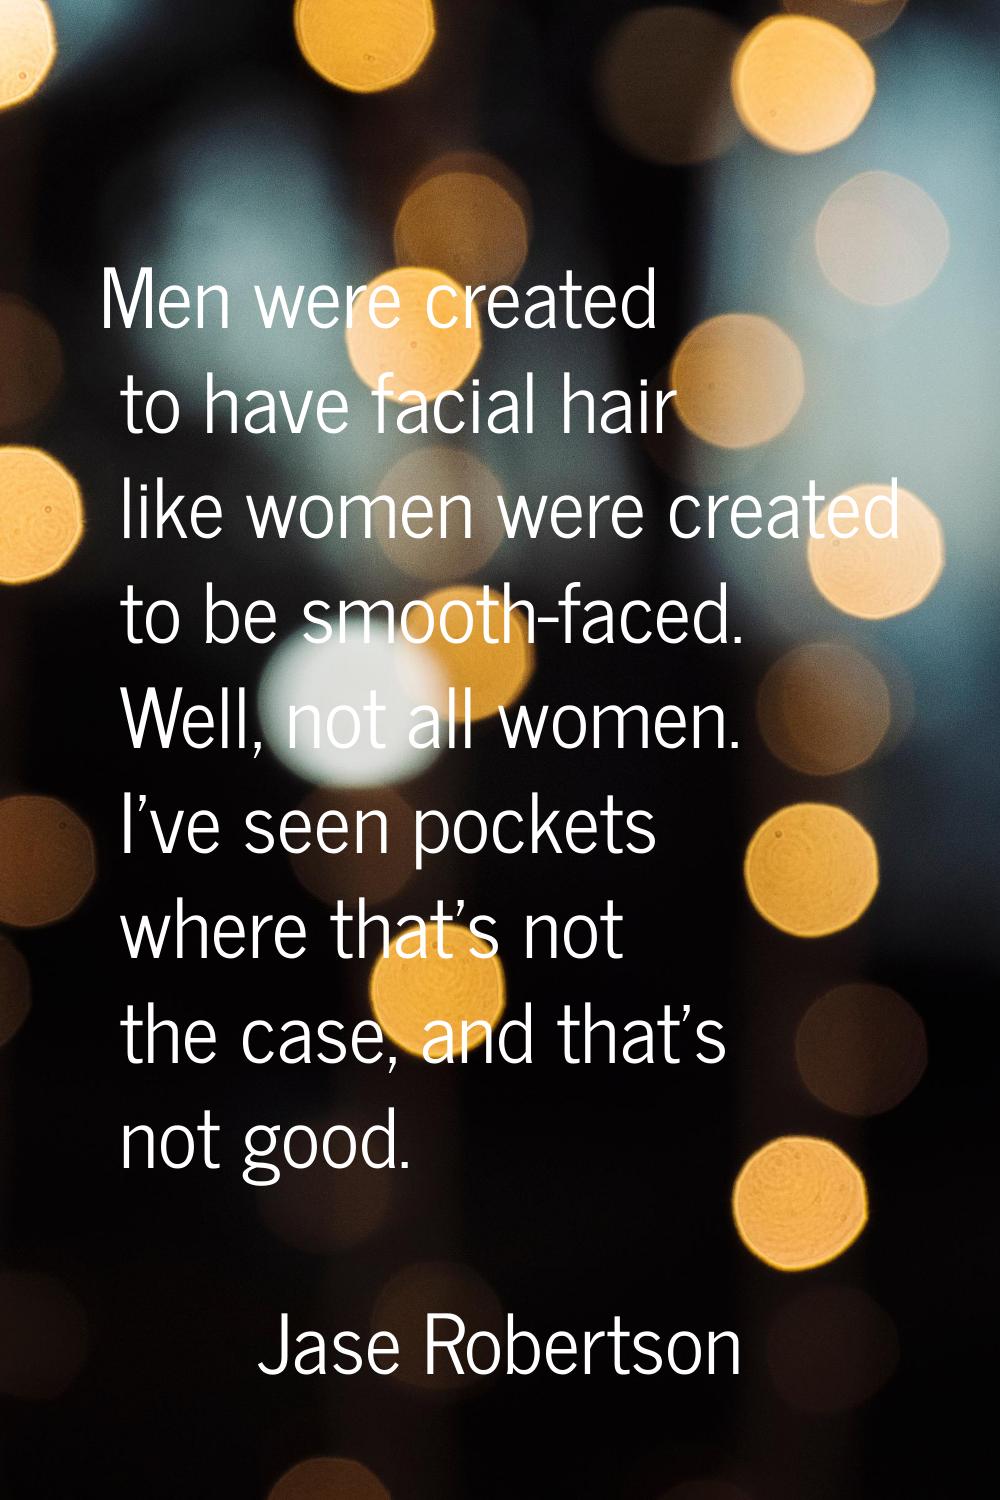 Men were created to have facial hair like women were created to be smooth-faced. Well, not all wome